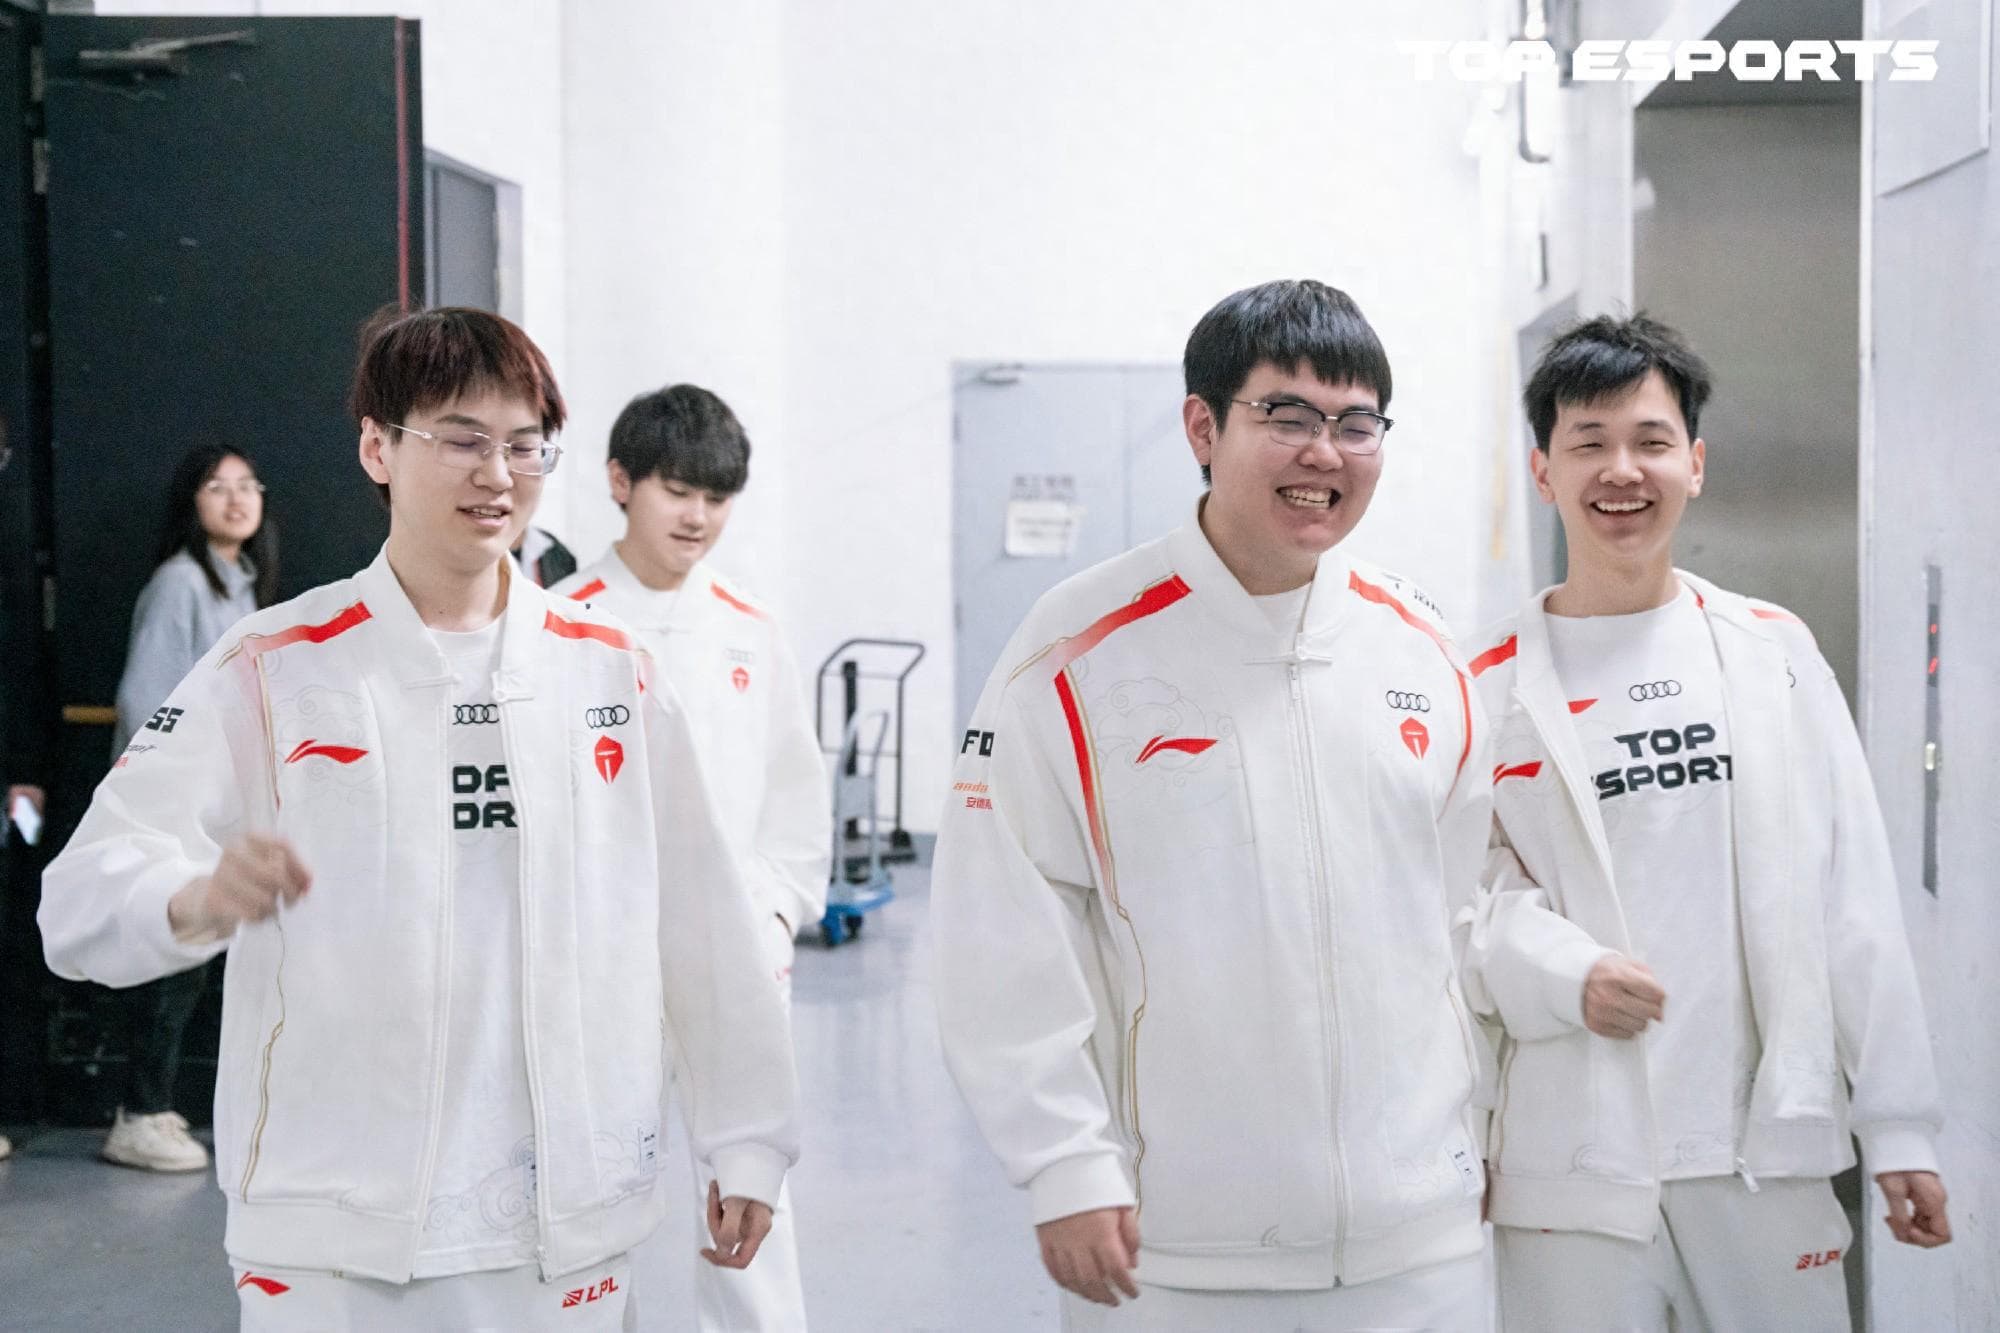  Meiko  : This is my second MSI after many years, and my goal this time is to reach the top four.